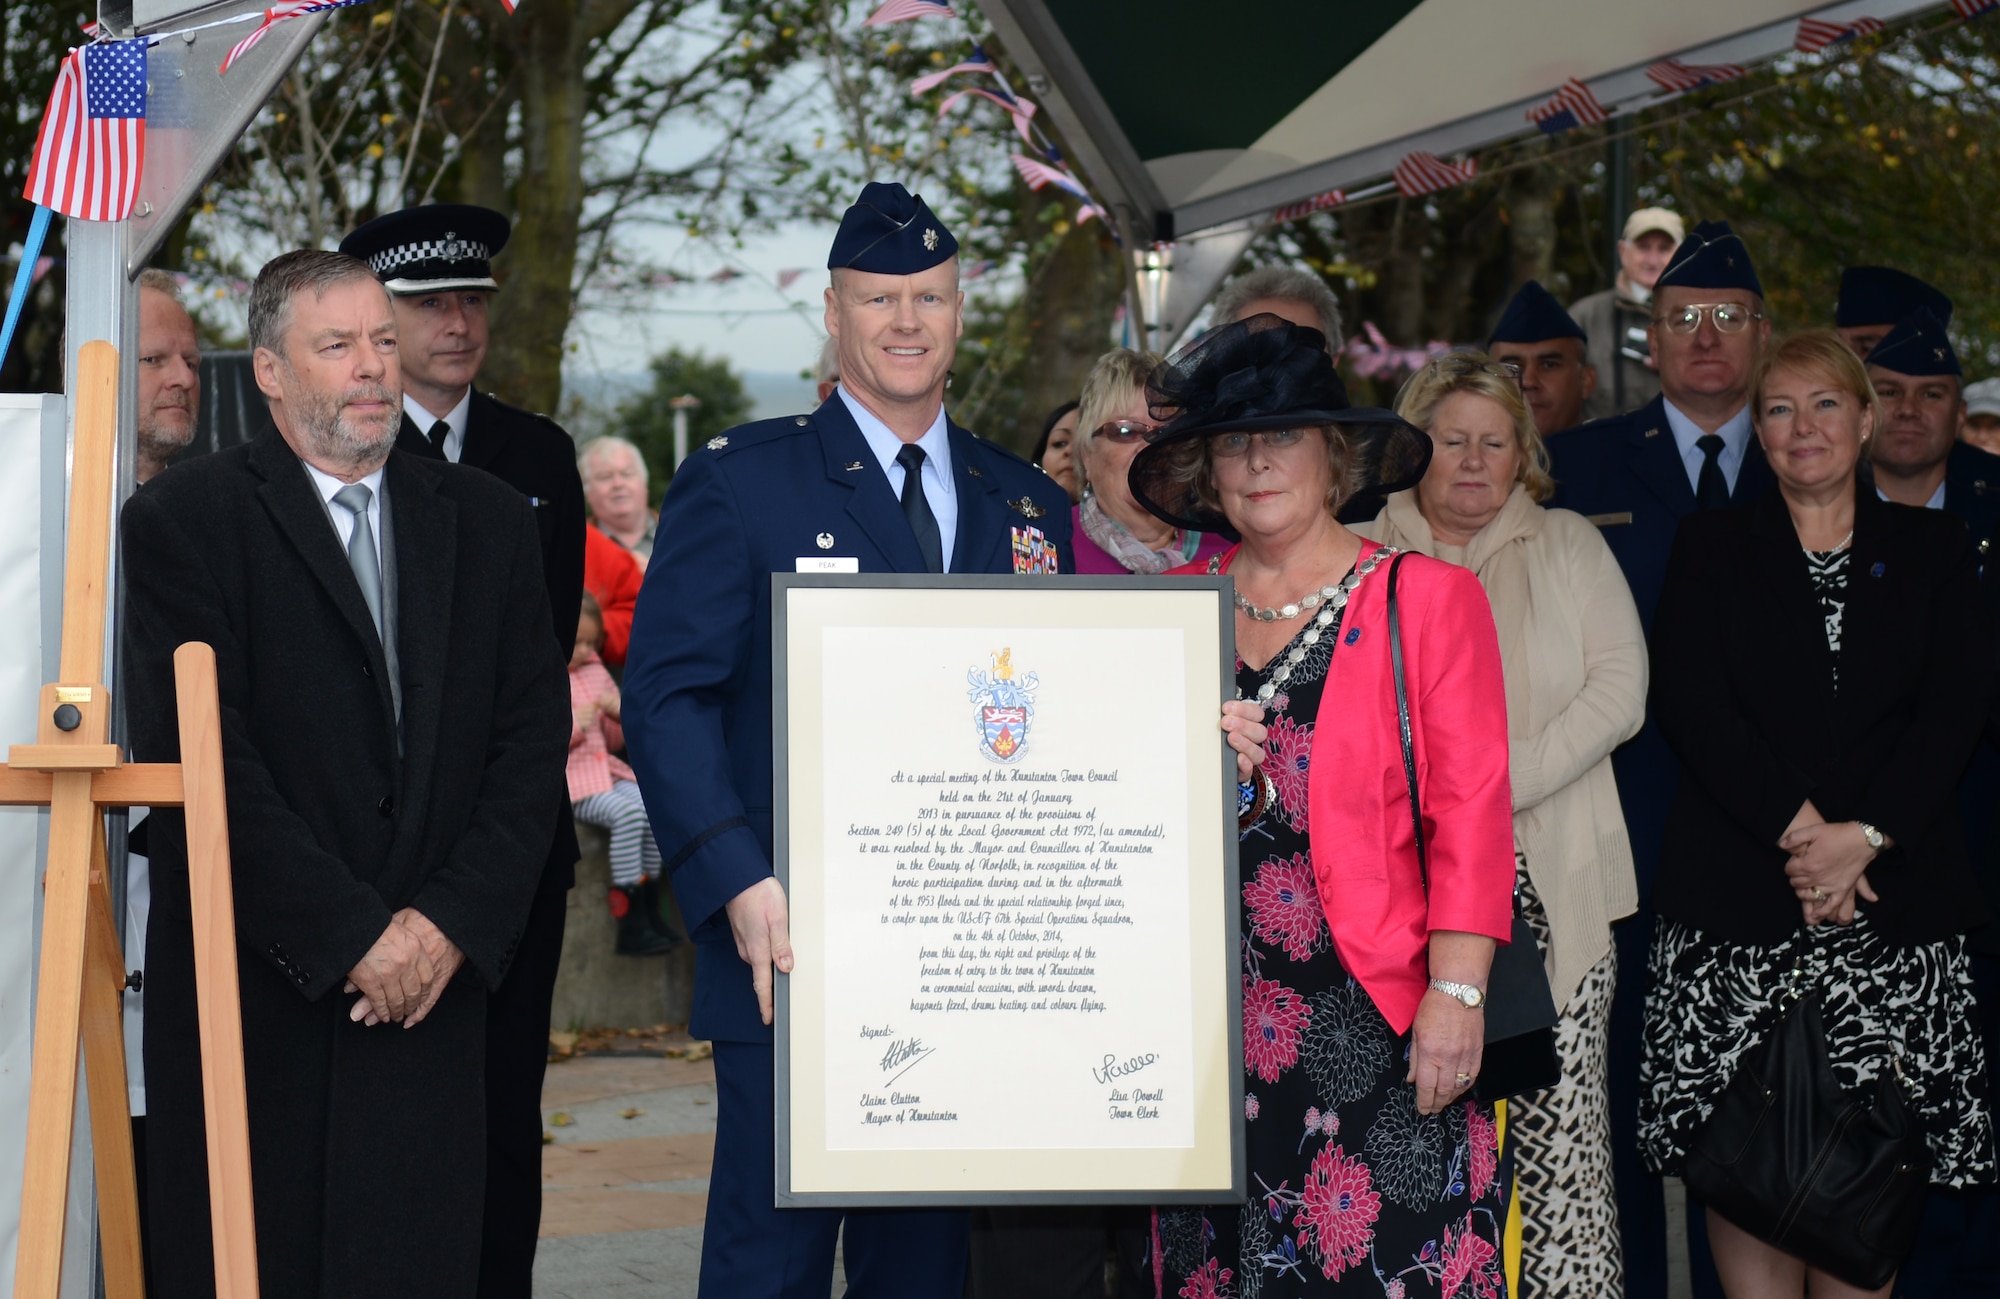 U.S. Air Force Lt. Col. John Peak, center, 67th Special Operations Squadron commander, receives the Freedom of Hunstanton from Counsillor Carol Bower, mayor of Hunstanton, Oct. 4, 2014, in Hunstanton, England. This is the highest award the town council is able to deliver to commemorate the lives saved by 67th Air Rescue Squadron Airmen during a flood in 1953. (U.S. Air Force photo/Airman 1st Class Kyla Gifford/Released)